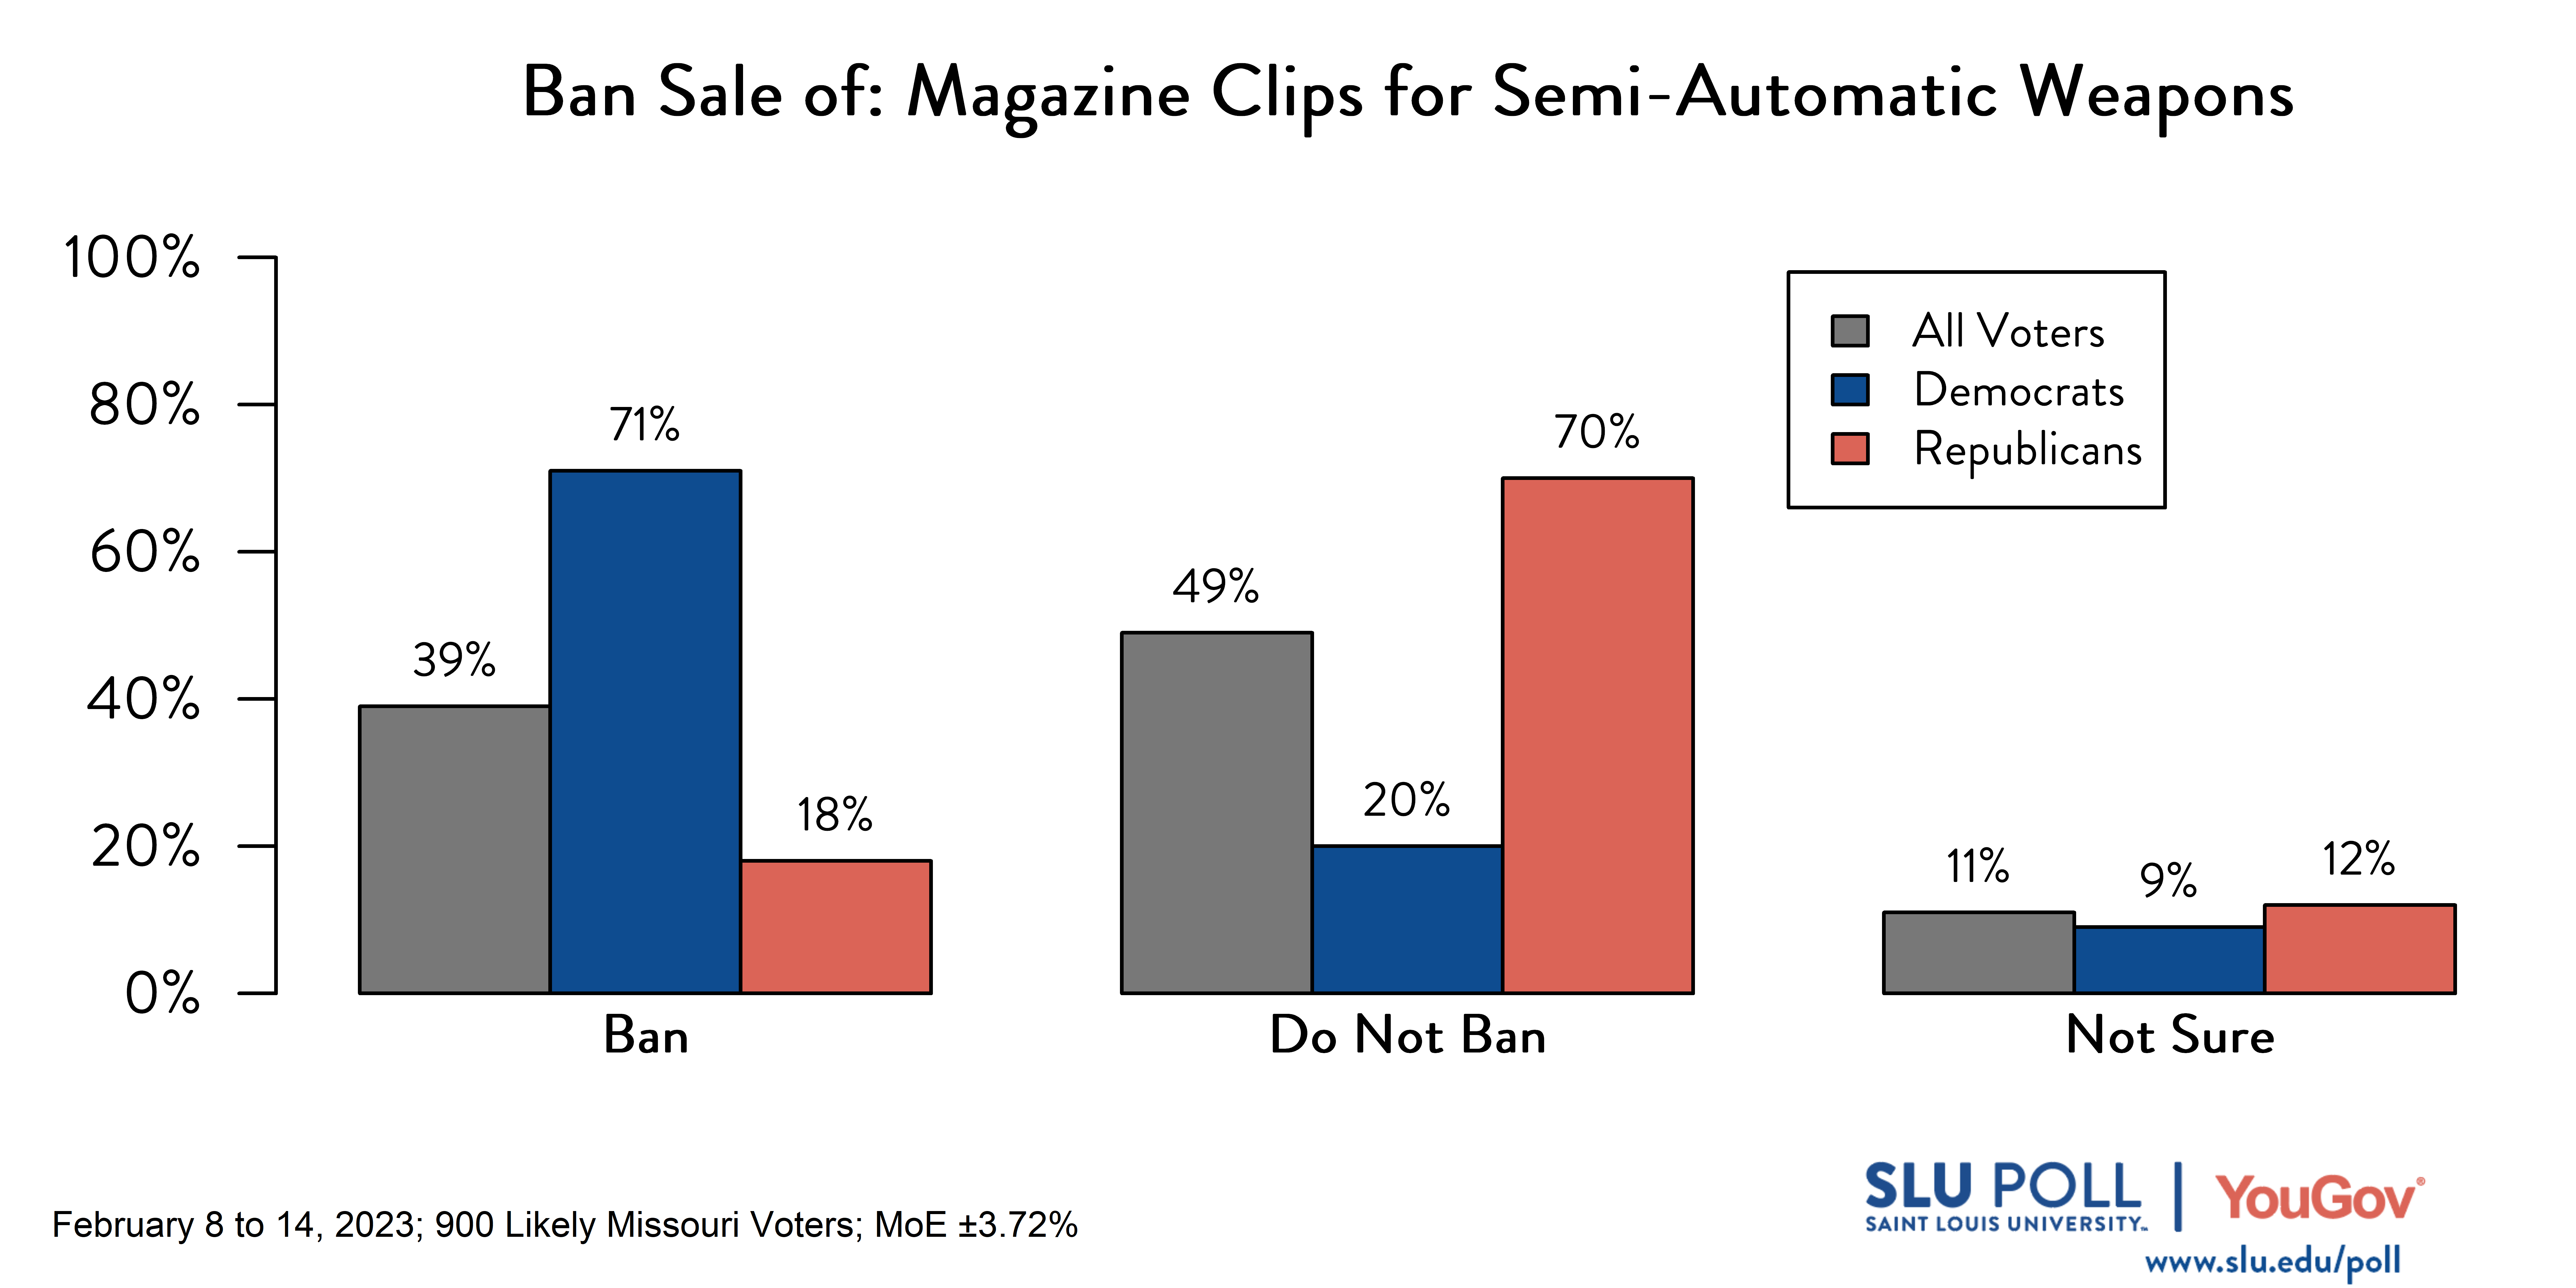 Likely voters' responses to 'Do you support banning the following gun-related sales, except those that are issued to law enforcement officers: The sale of magazine clips for semi-automatic weapons?': 39% Ban, 49% Do not ban, and 11% Not sure. Democratic voters' responses: ' 71% Ban, 20% Do not ban, and 9% Not sure. Republican voters' responses: 18% Ban, 70% Do not ban, and 12% Not sure.